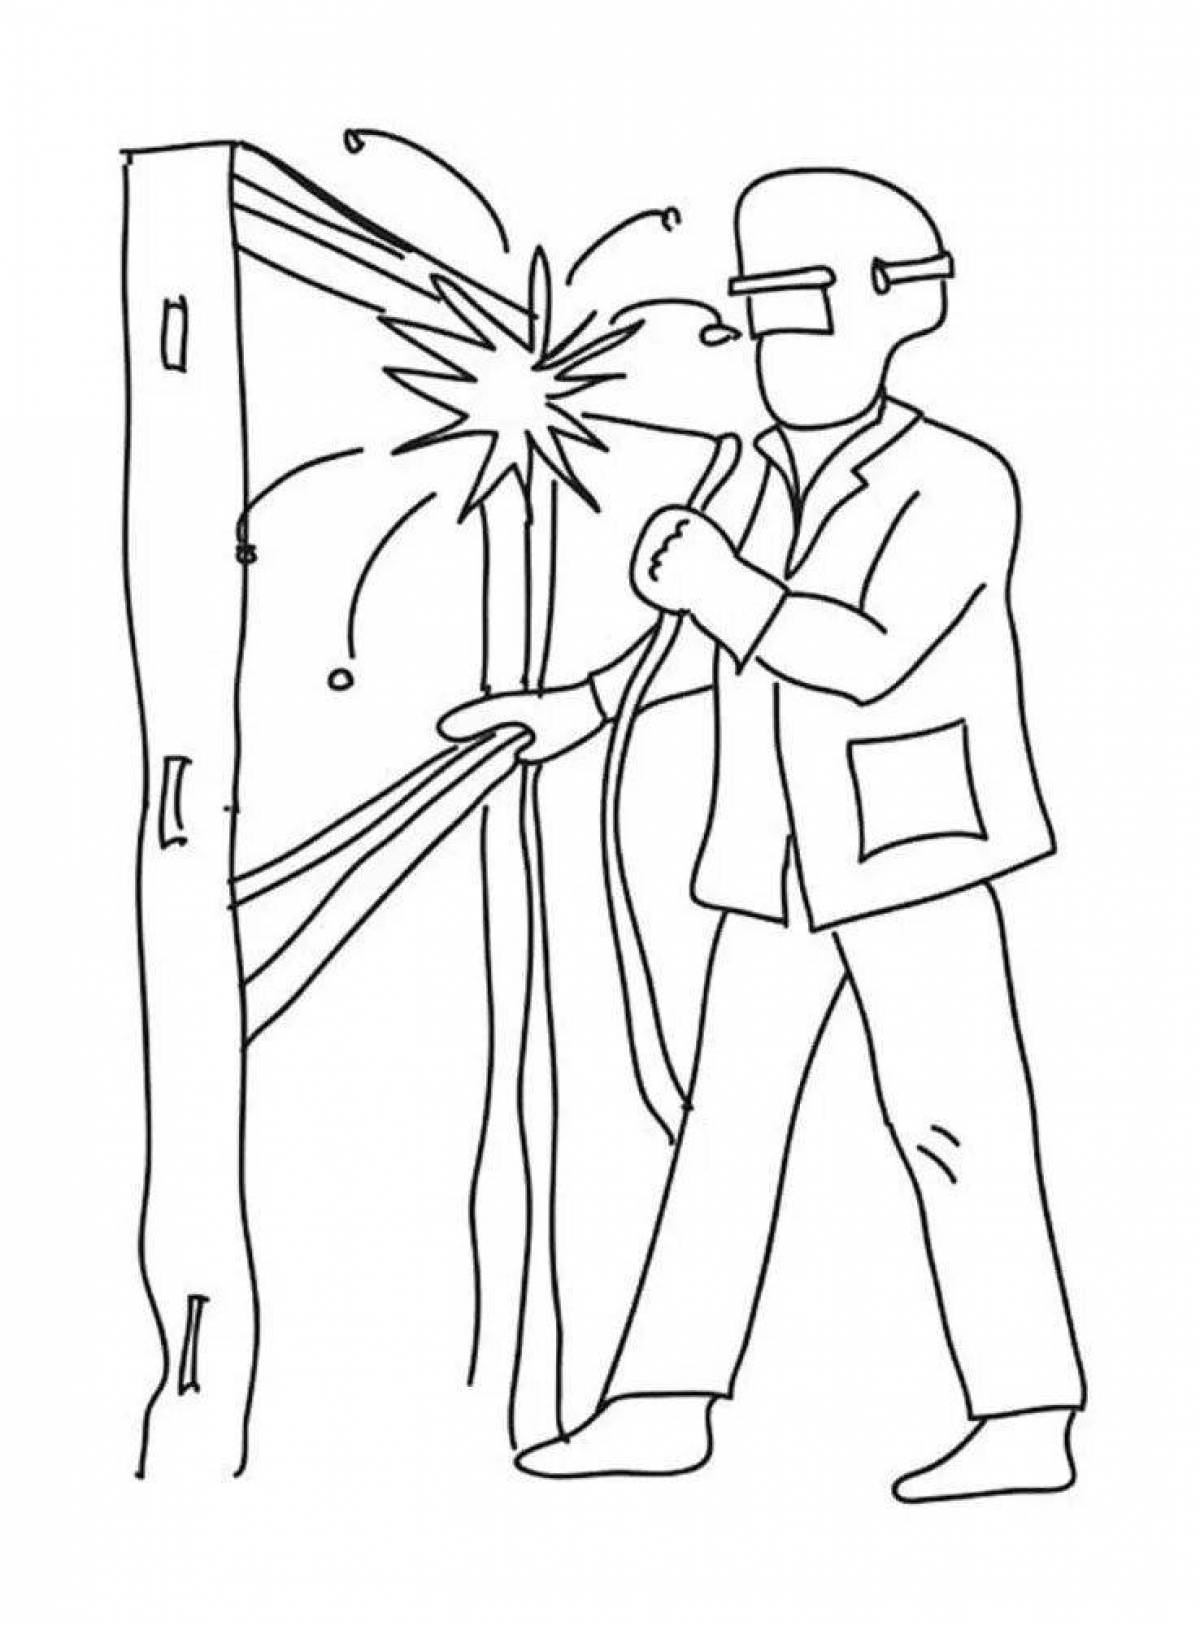 Charming welder coloring page